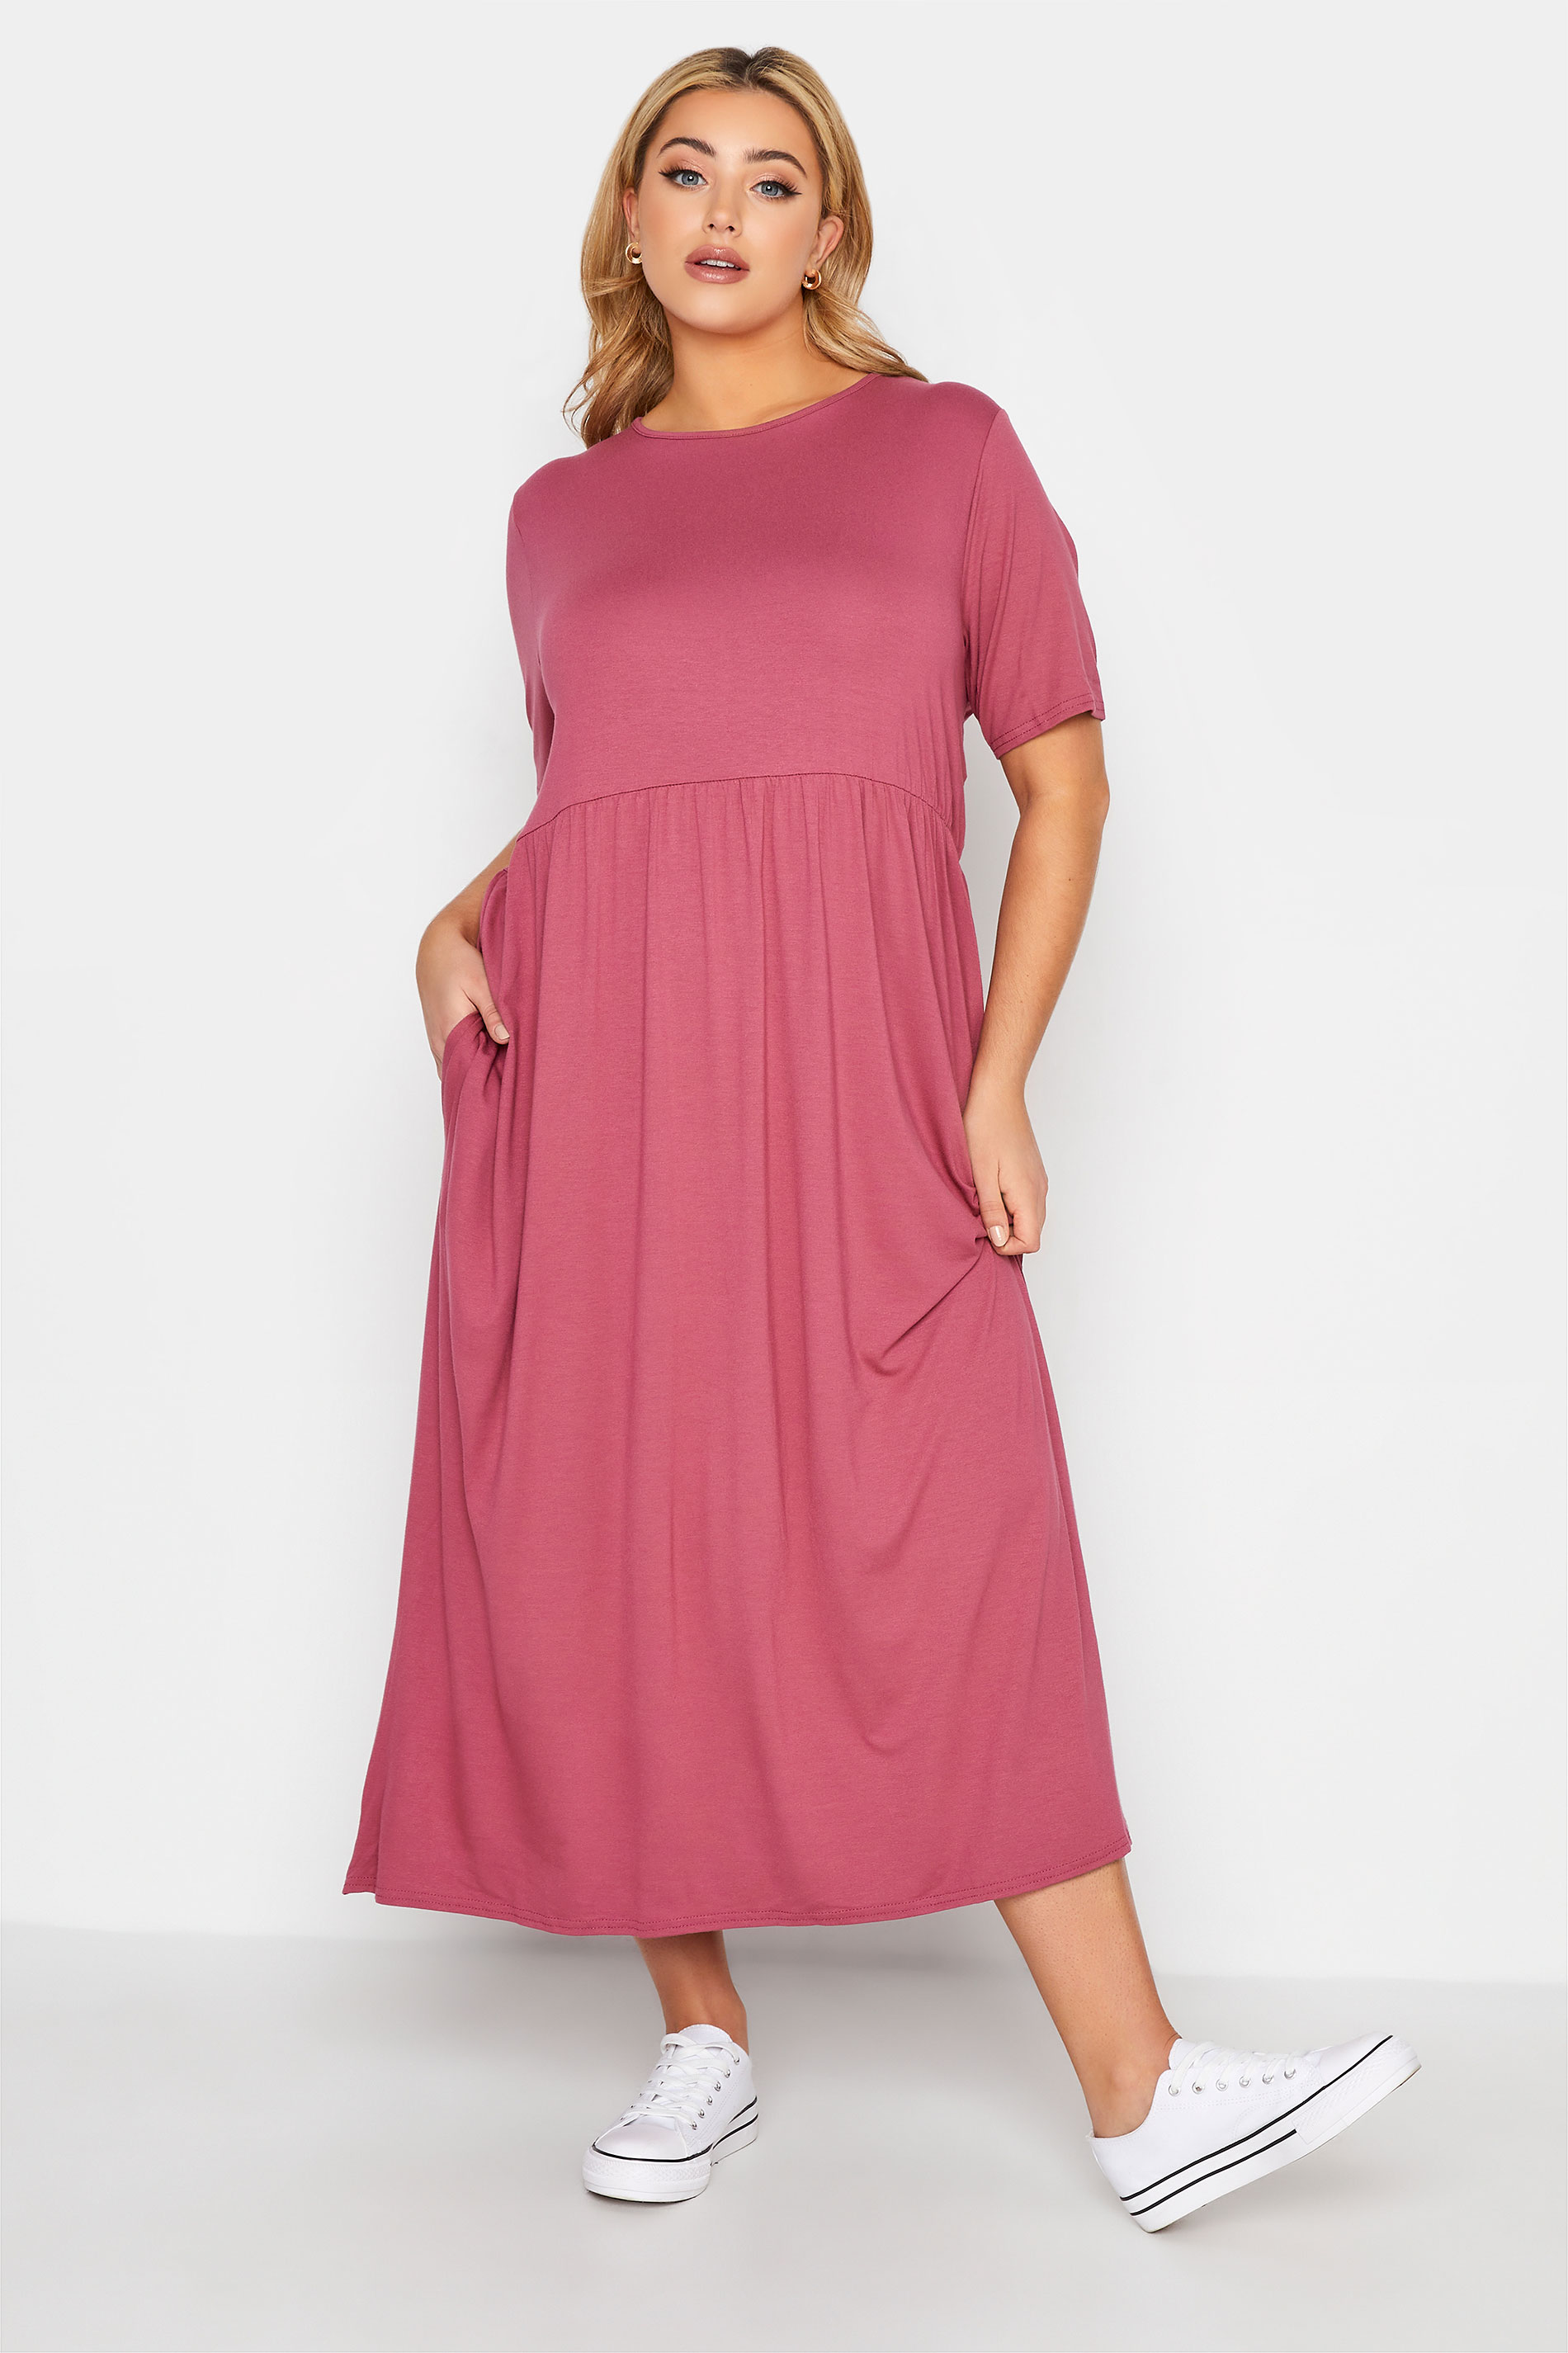 LIMITED COLLECTION Curve Pink Throw On Maxi Dress_Rjpg.jpg